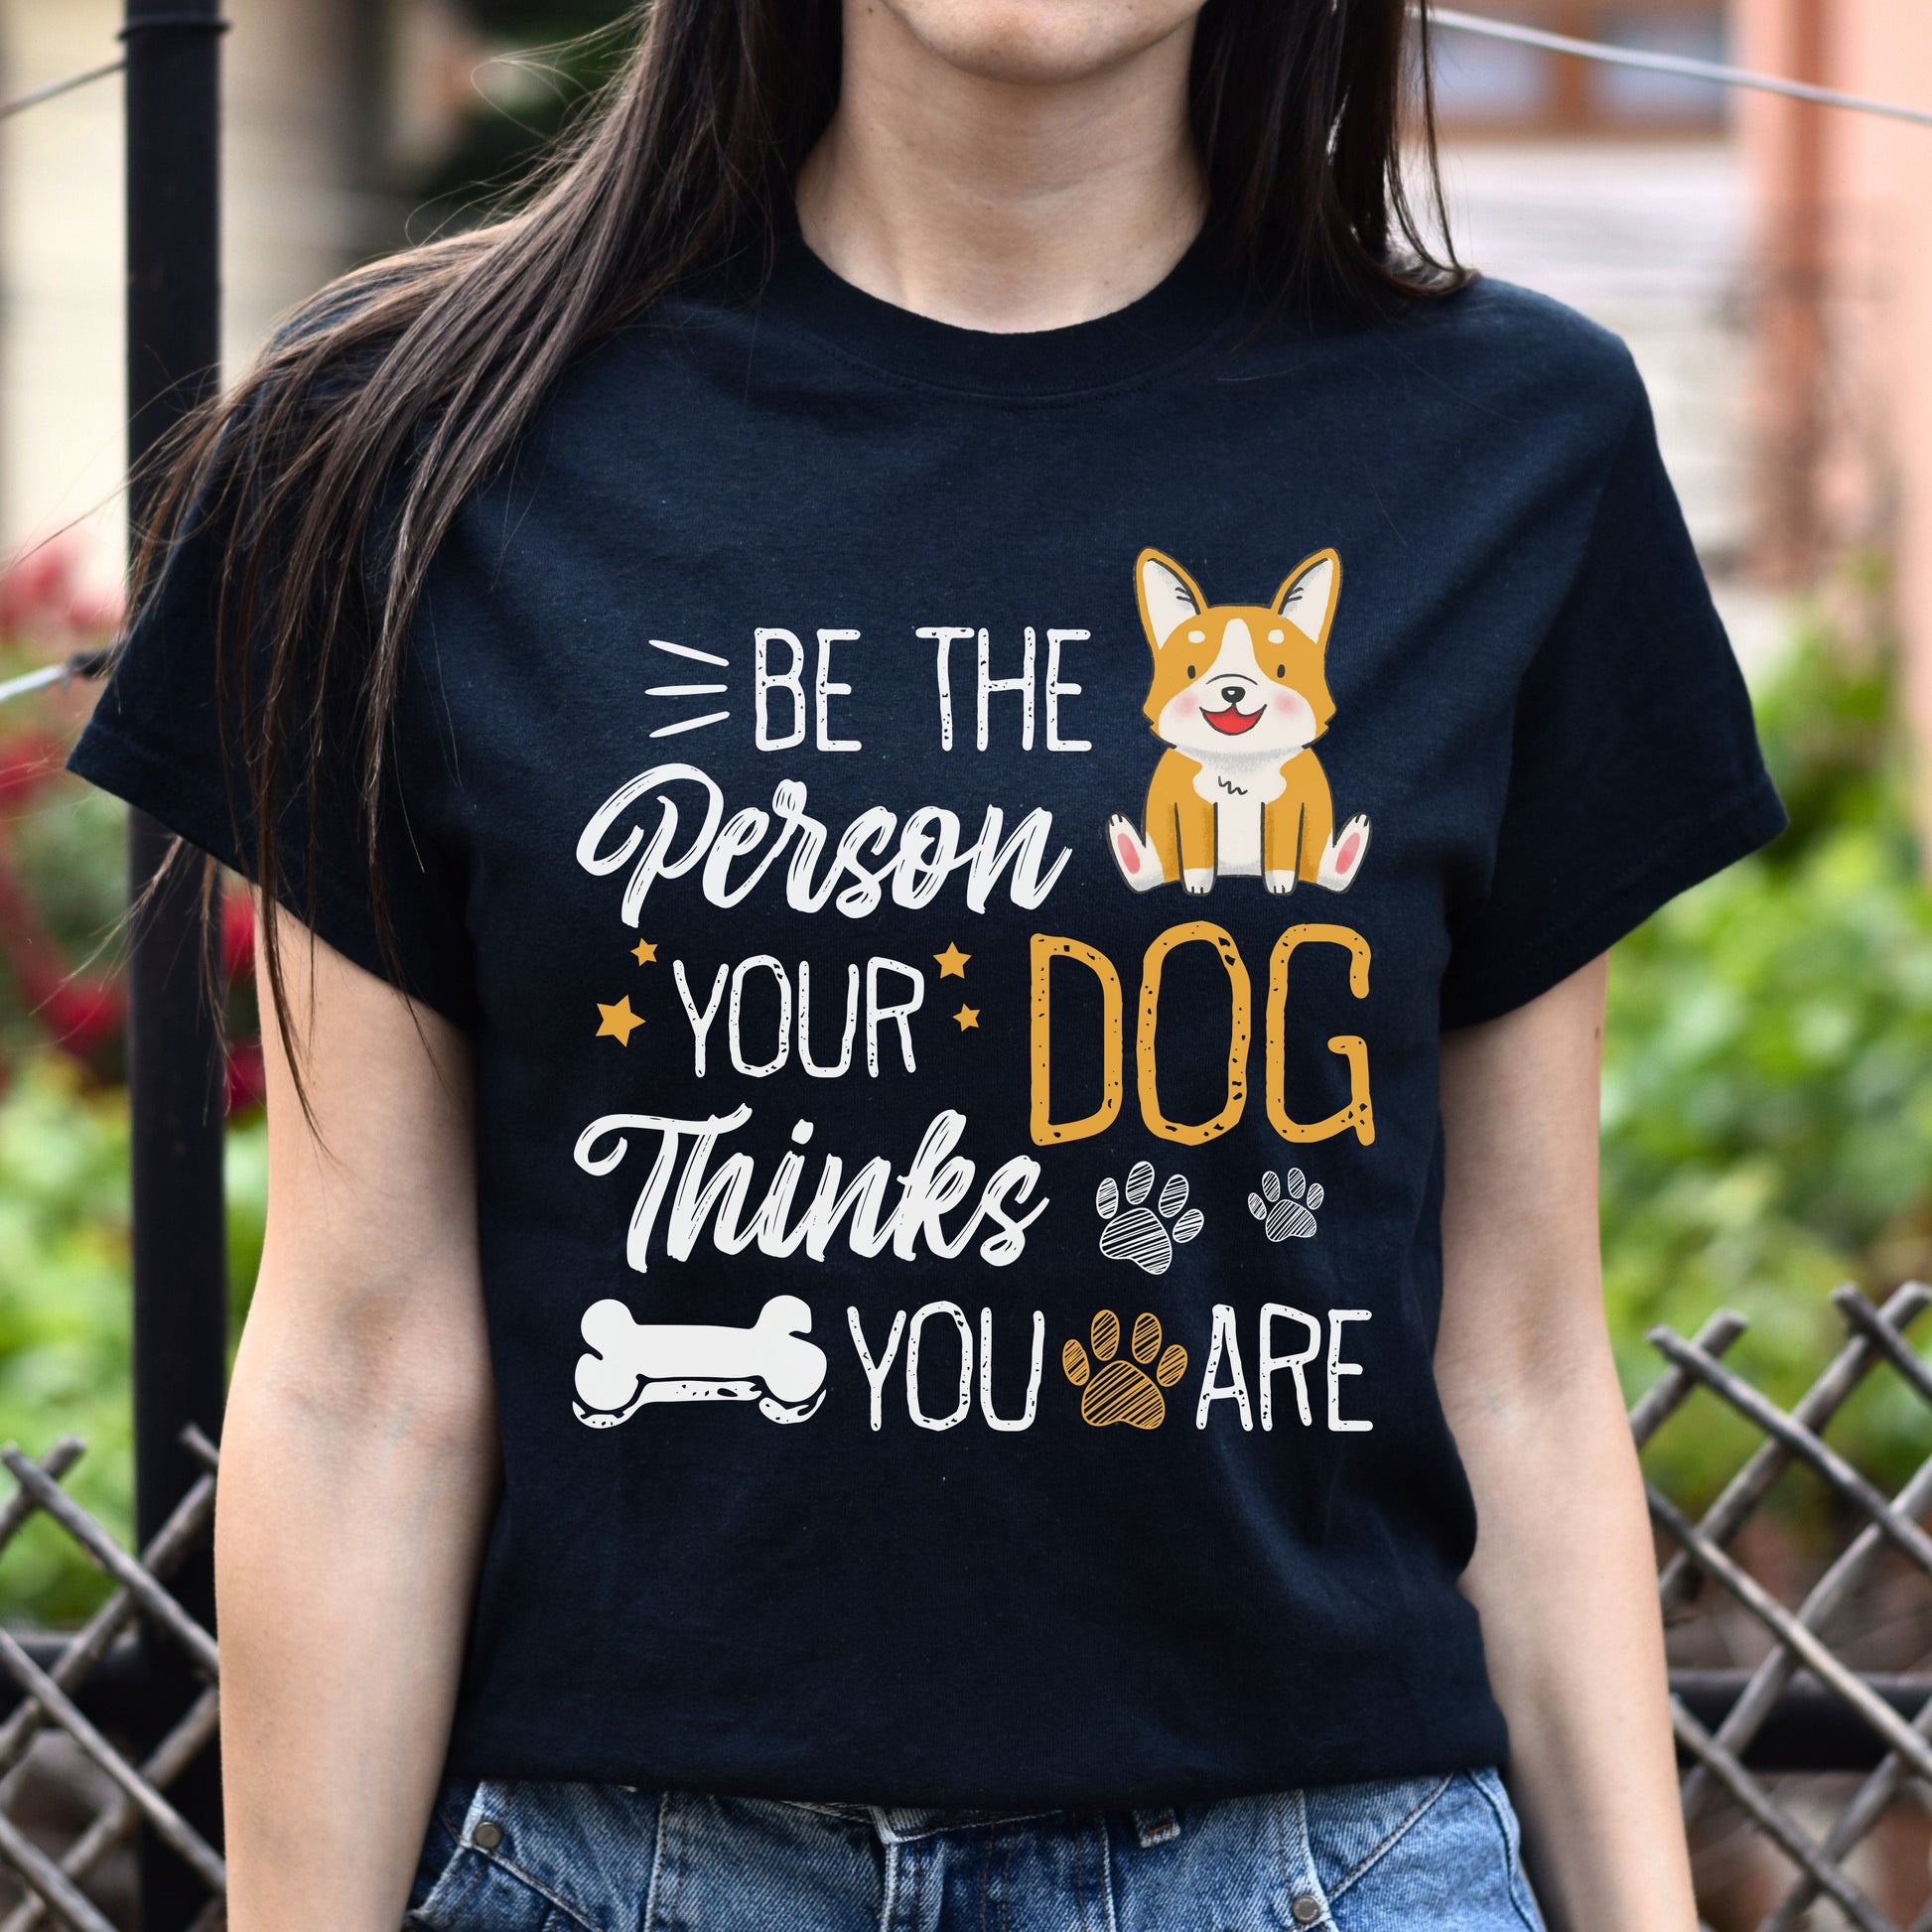 Be the person your dog thinks you are Unisex t-shirt gift black navy dark heather-Family-Gift-Planet